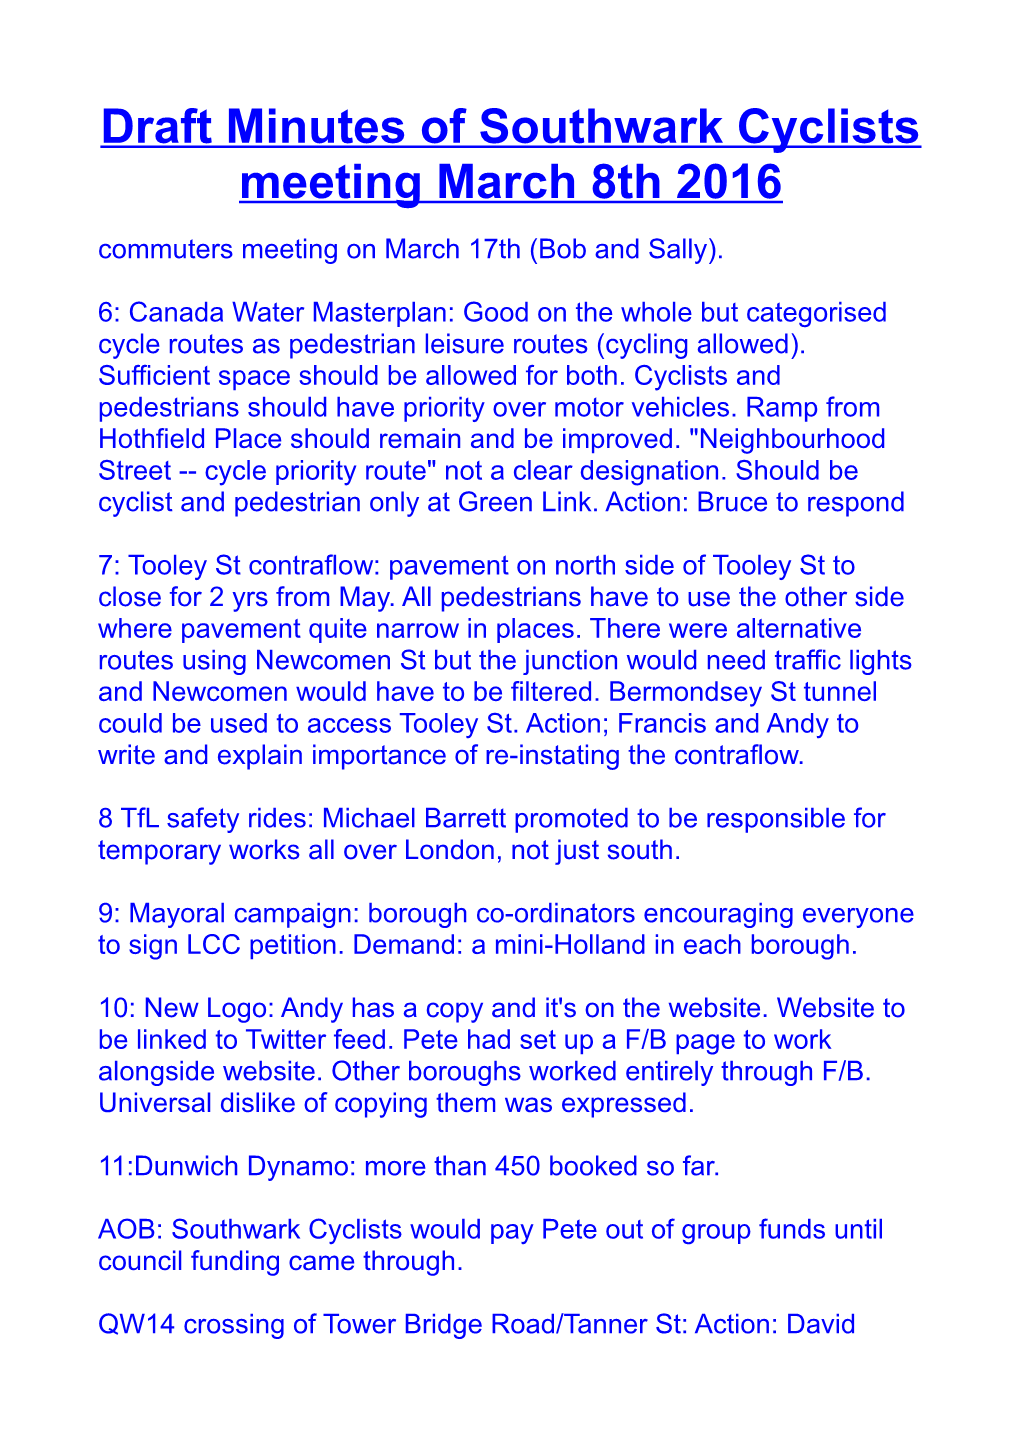 Draft Minutes of Southwark Cyclists Meeting March 8Th 2016